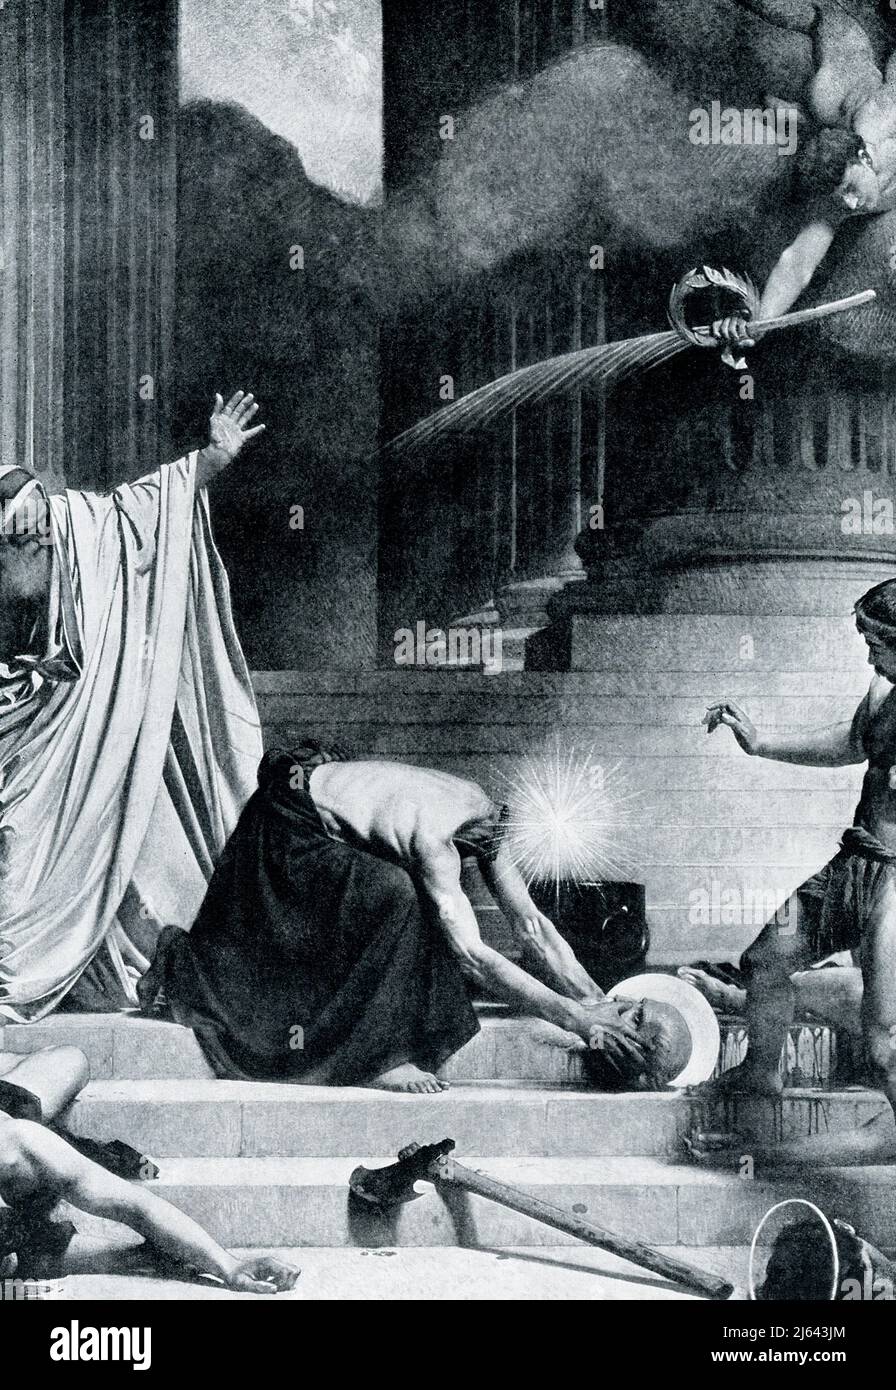 The 1906 caption reads: “MARTYRDOM OF SAINT DENIS.—Denis or Dionysius was the first bishop of Paris, and he has been adopted as the patron saint of France. He and his chief followers were beheaded at Paris in one of the Christian persecutions by the Roman Emperors. According to legend, the saint picked up his severed head and walked with it two miles to the hill of Montmartre where he wished to be buried. It is a scene which French artists are fond of portraying with all the miraculous accompaniments, as we see them here.” Denis of Paris was a 3rd-century Christian martyr and saint. According Stock Photo